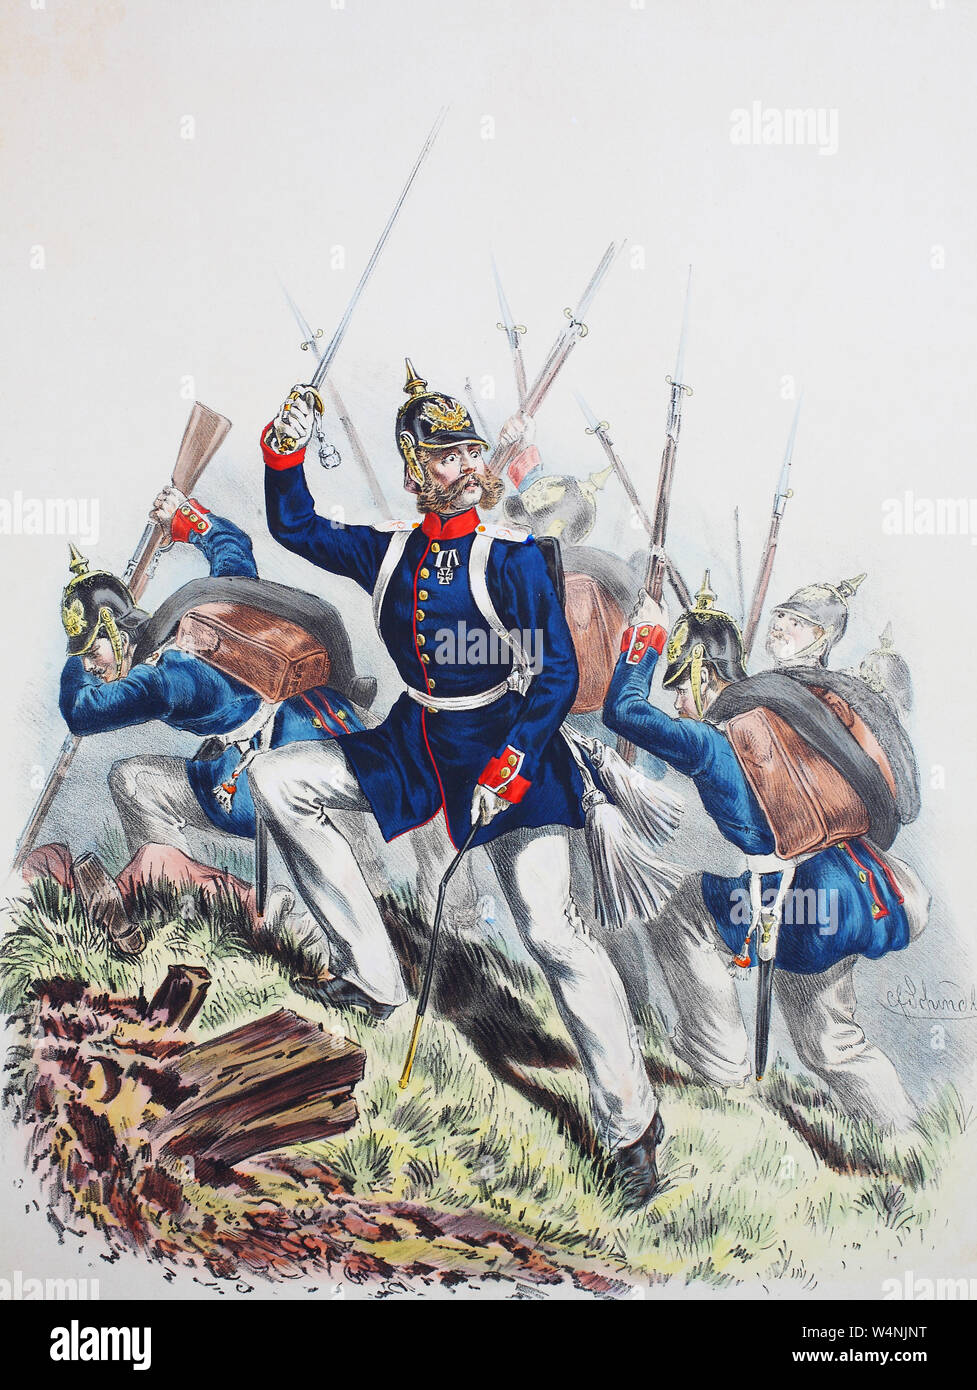 Royal Prussian Army, Guards Corps, Preußens Heer, preussische Garde, Colbergsches Grenadier-Regiment, 2. Pommersches Regiment No.9, Offizier, Digital improved reproduction of an illustration from the 19th century Stock Photo